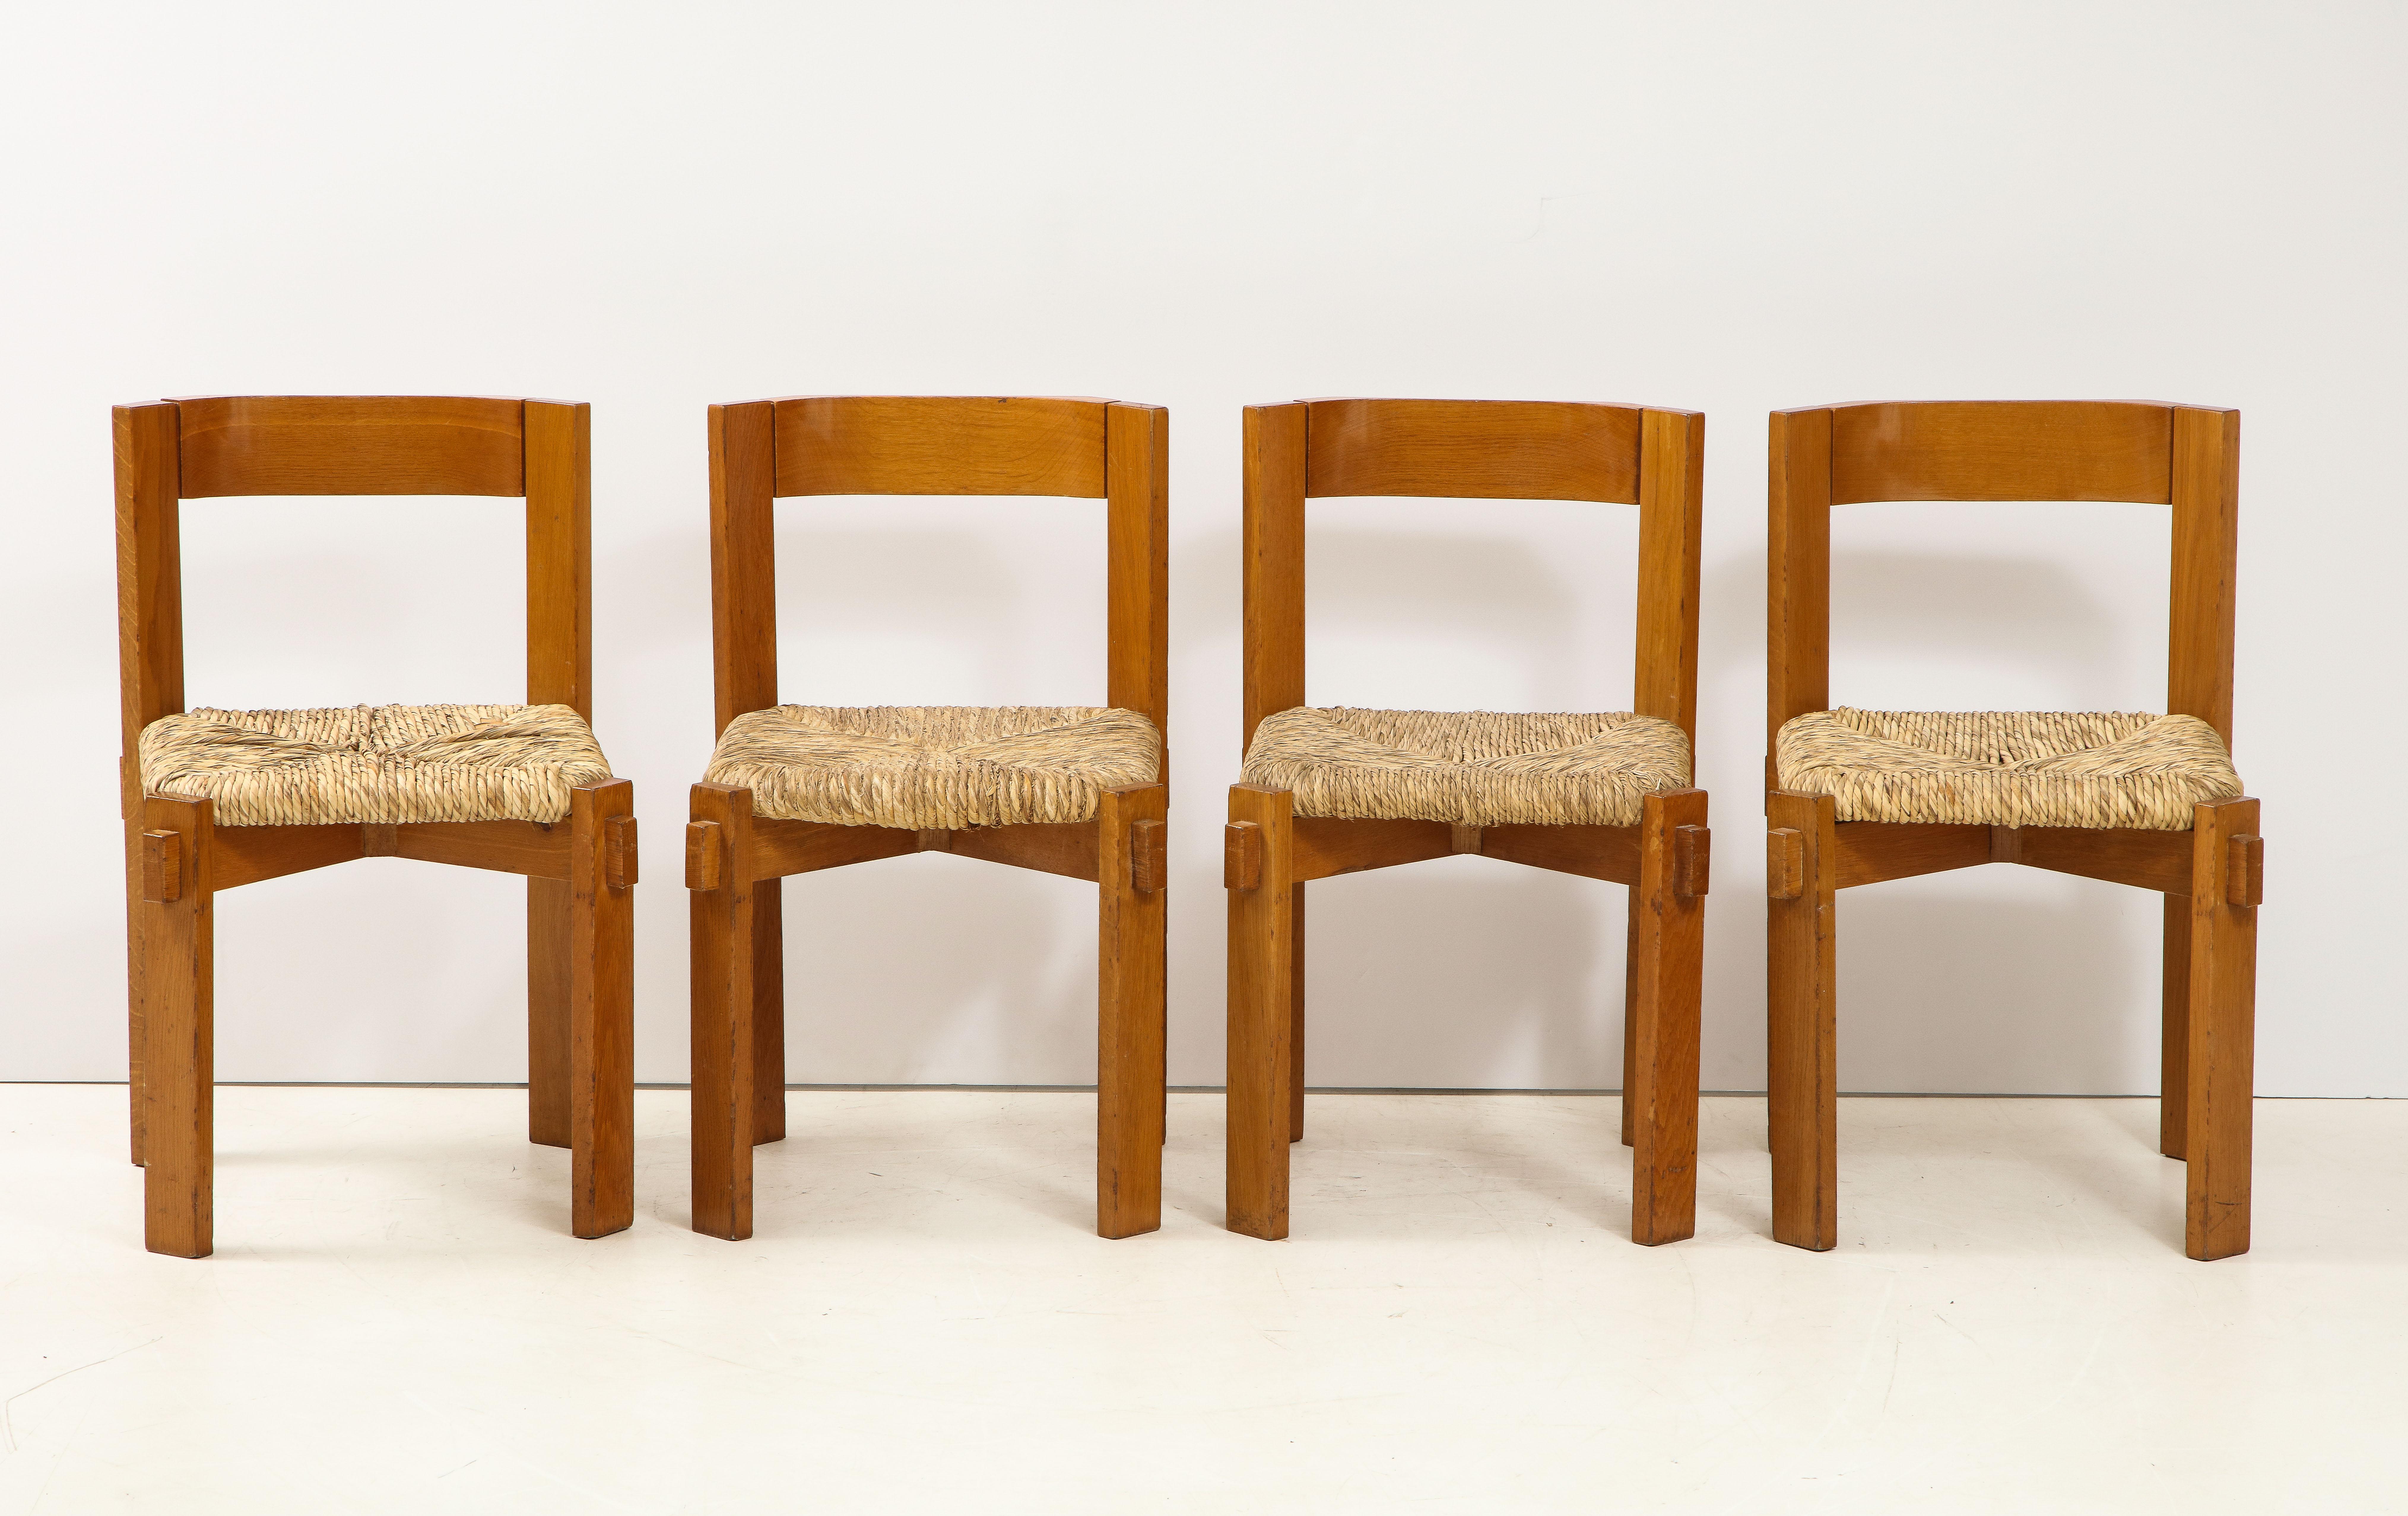 A set of four modernist Italian oak and straw chairs, the oak a beautiful soft color complements the organic material of the straw seats, which are removable. The curved back, angled legs and interlocking wood construction is a wonderful example of